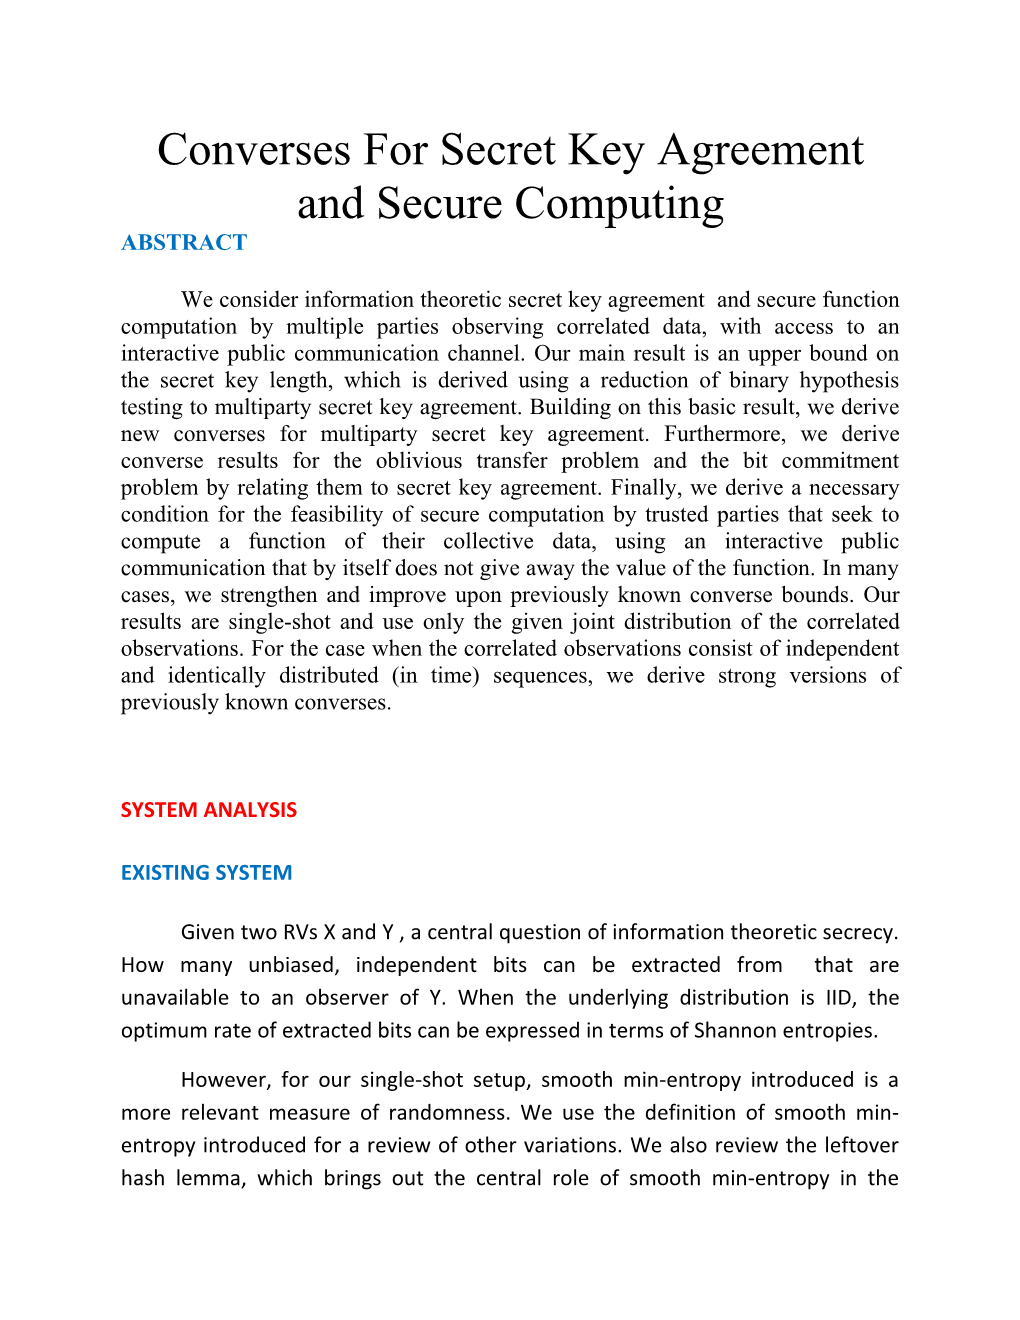 Converses for Secret Key Agreement and Secure Computing